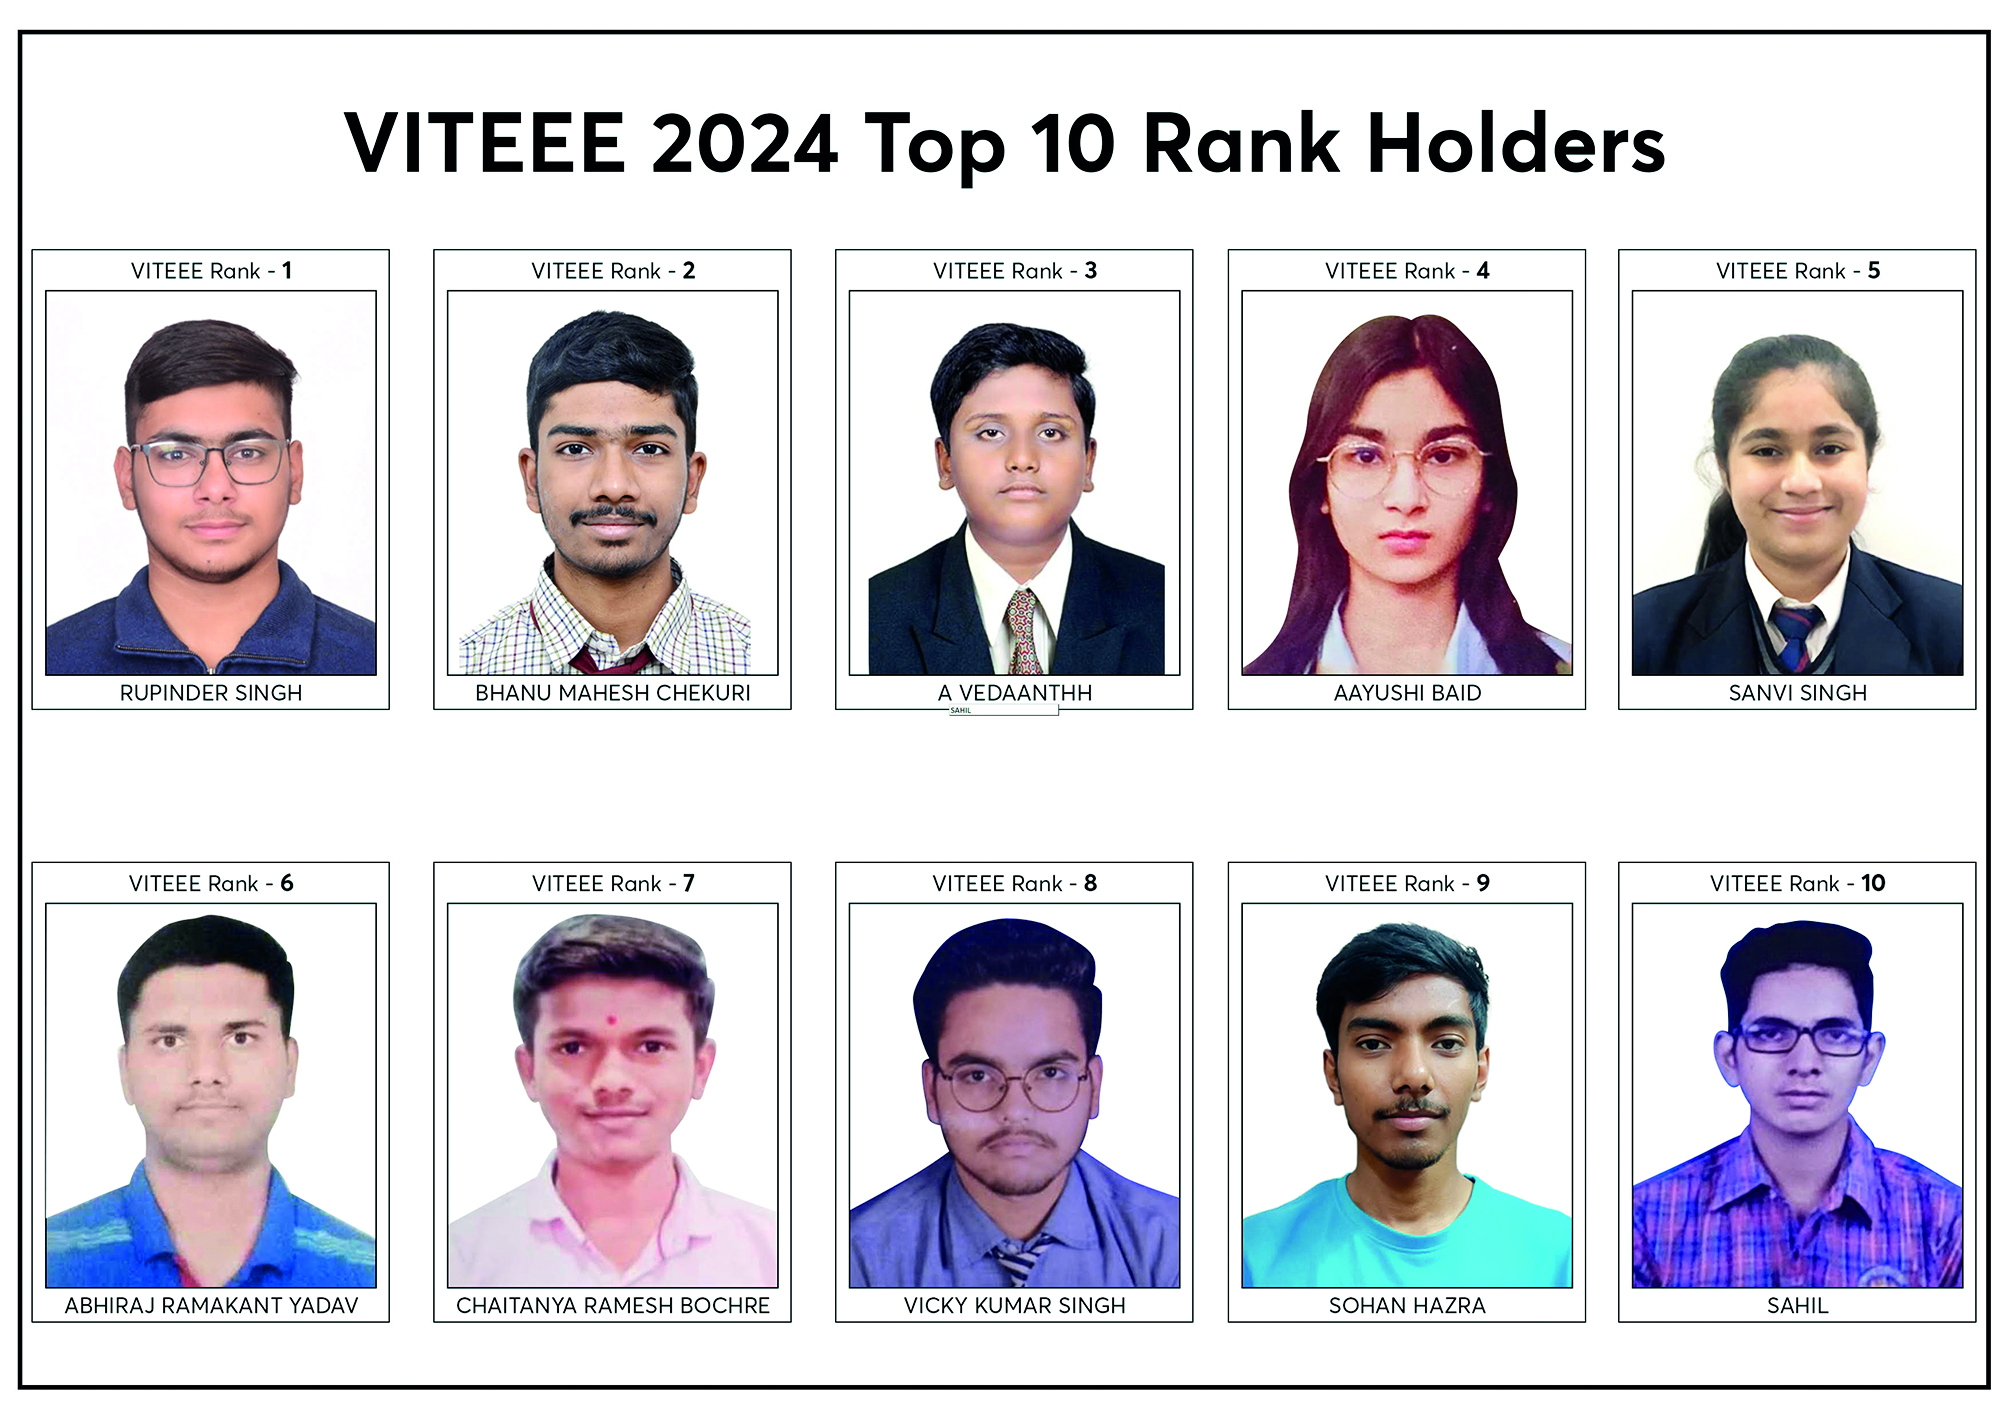 Vellore Institute of Technology declares results for its Engineering Entrance Exam